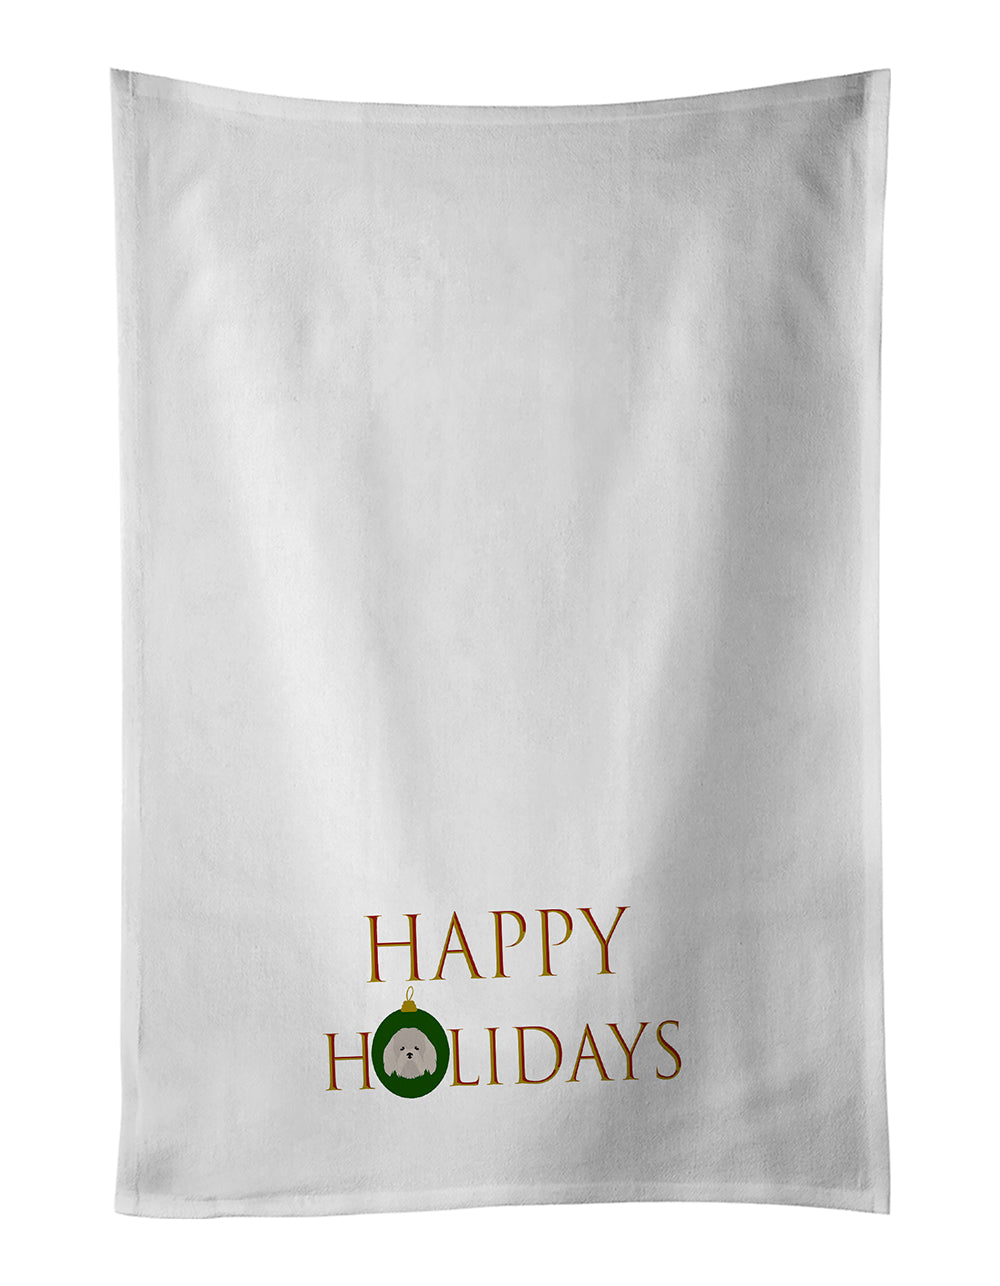 Buy this Coton de Tulear - Dog Face Happy Holidays Christmas White Kitchen Towel Set of 2